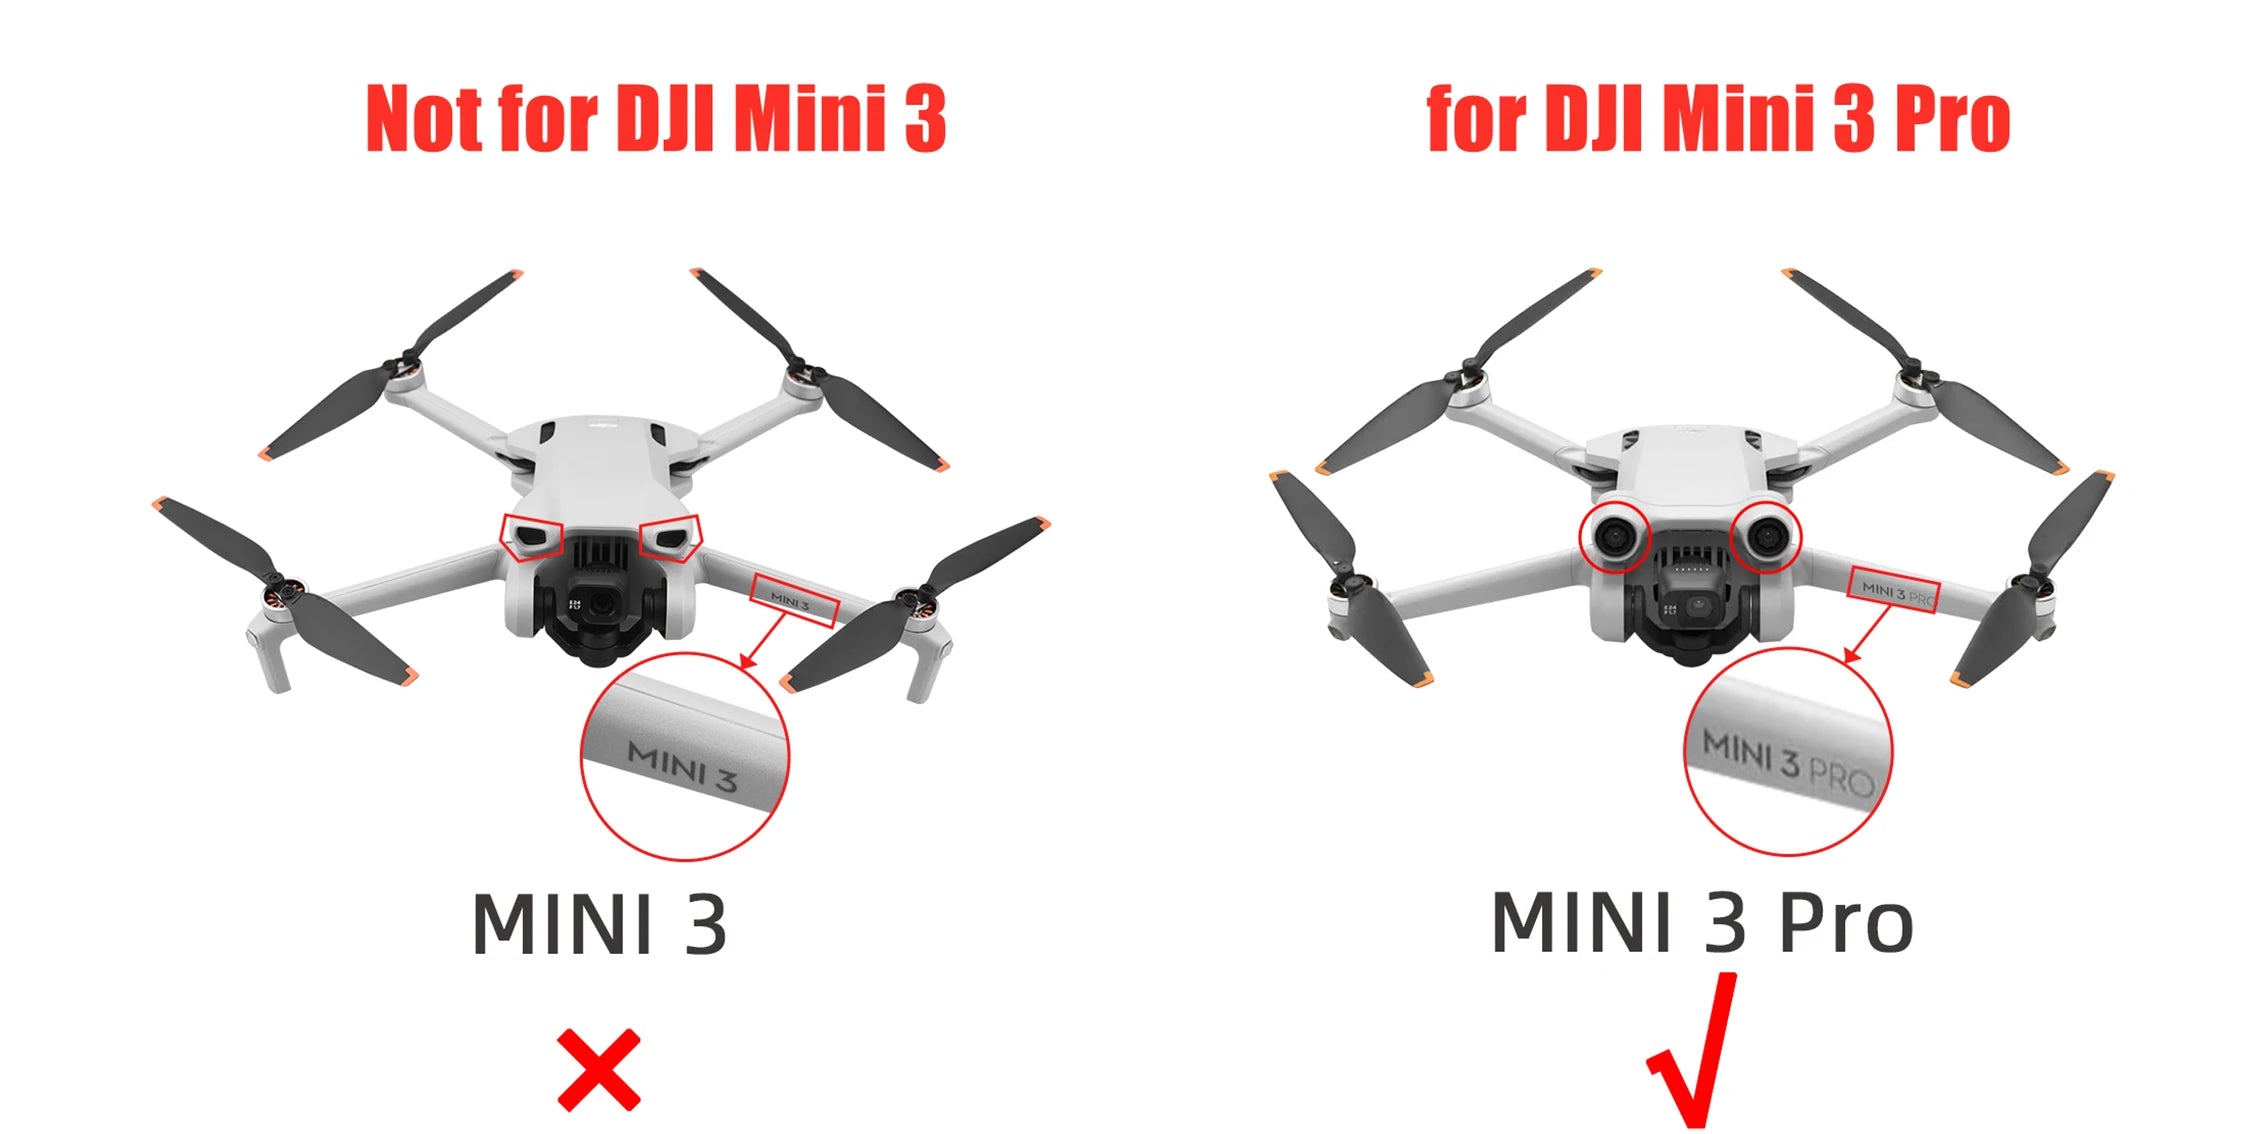 Folding Landing Gear for DJI MINI 3 PRO Drone, the picture may not reflect the actual color of the item . please make sure you do not